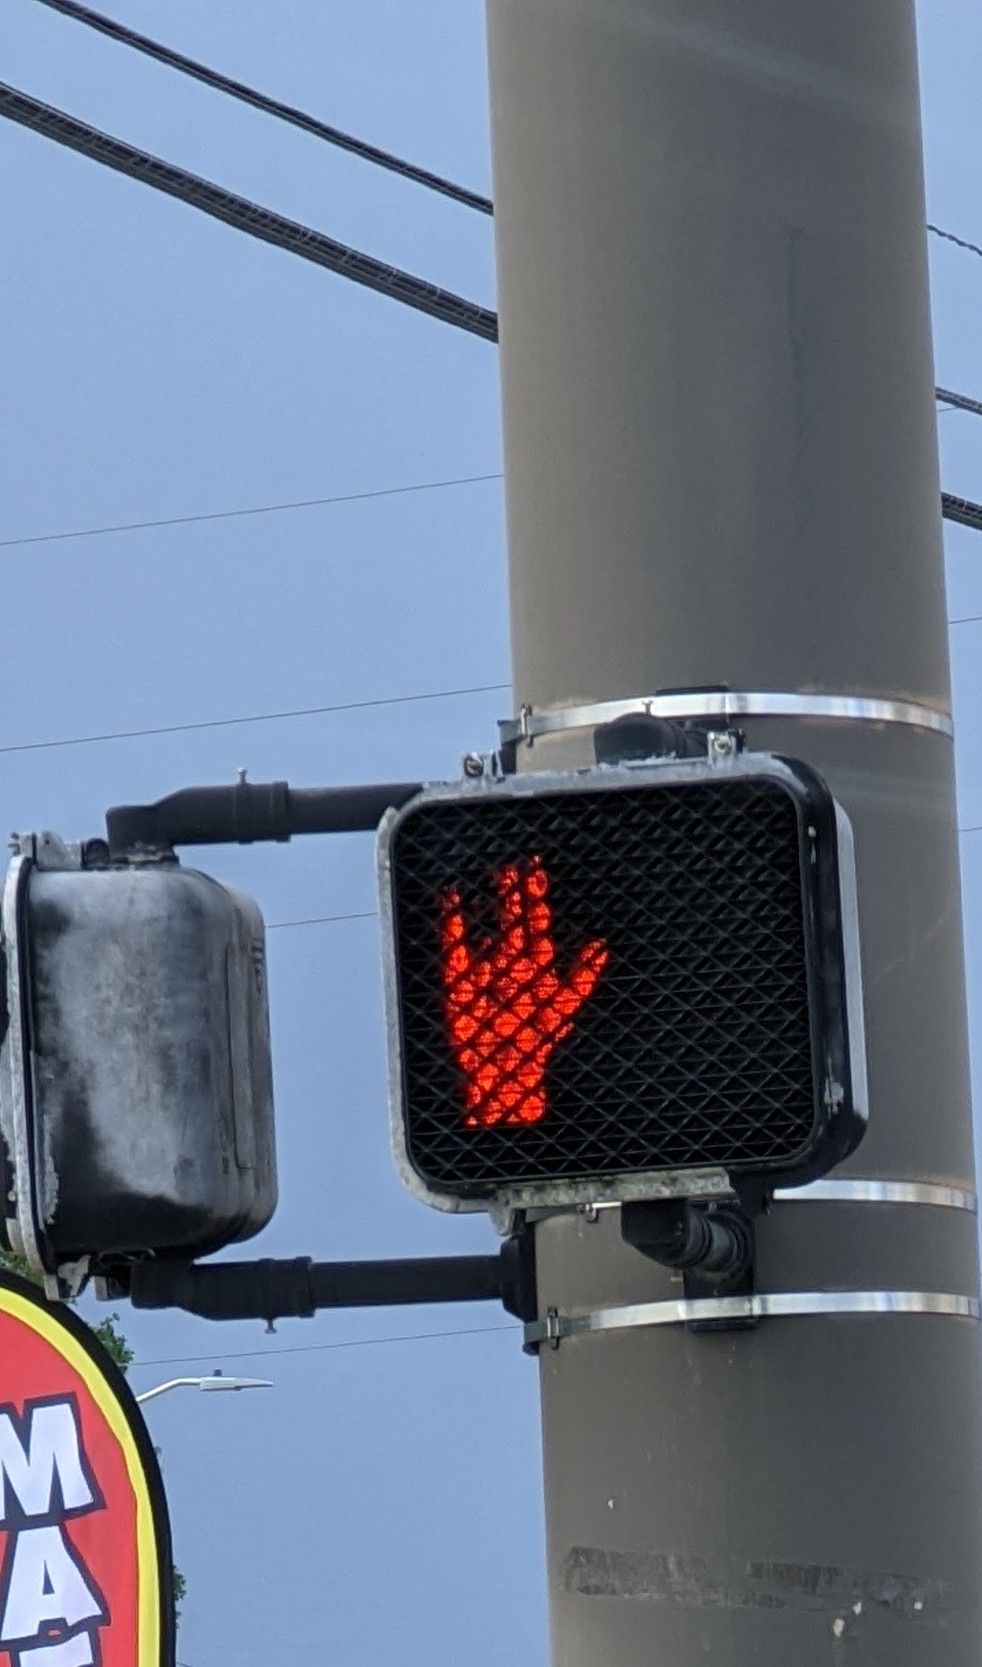 Found a shocking crosswalk sign this morning.